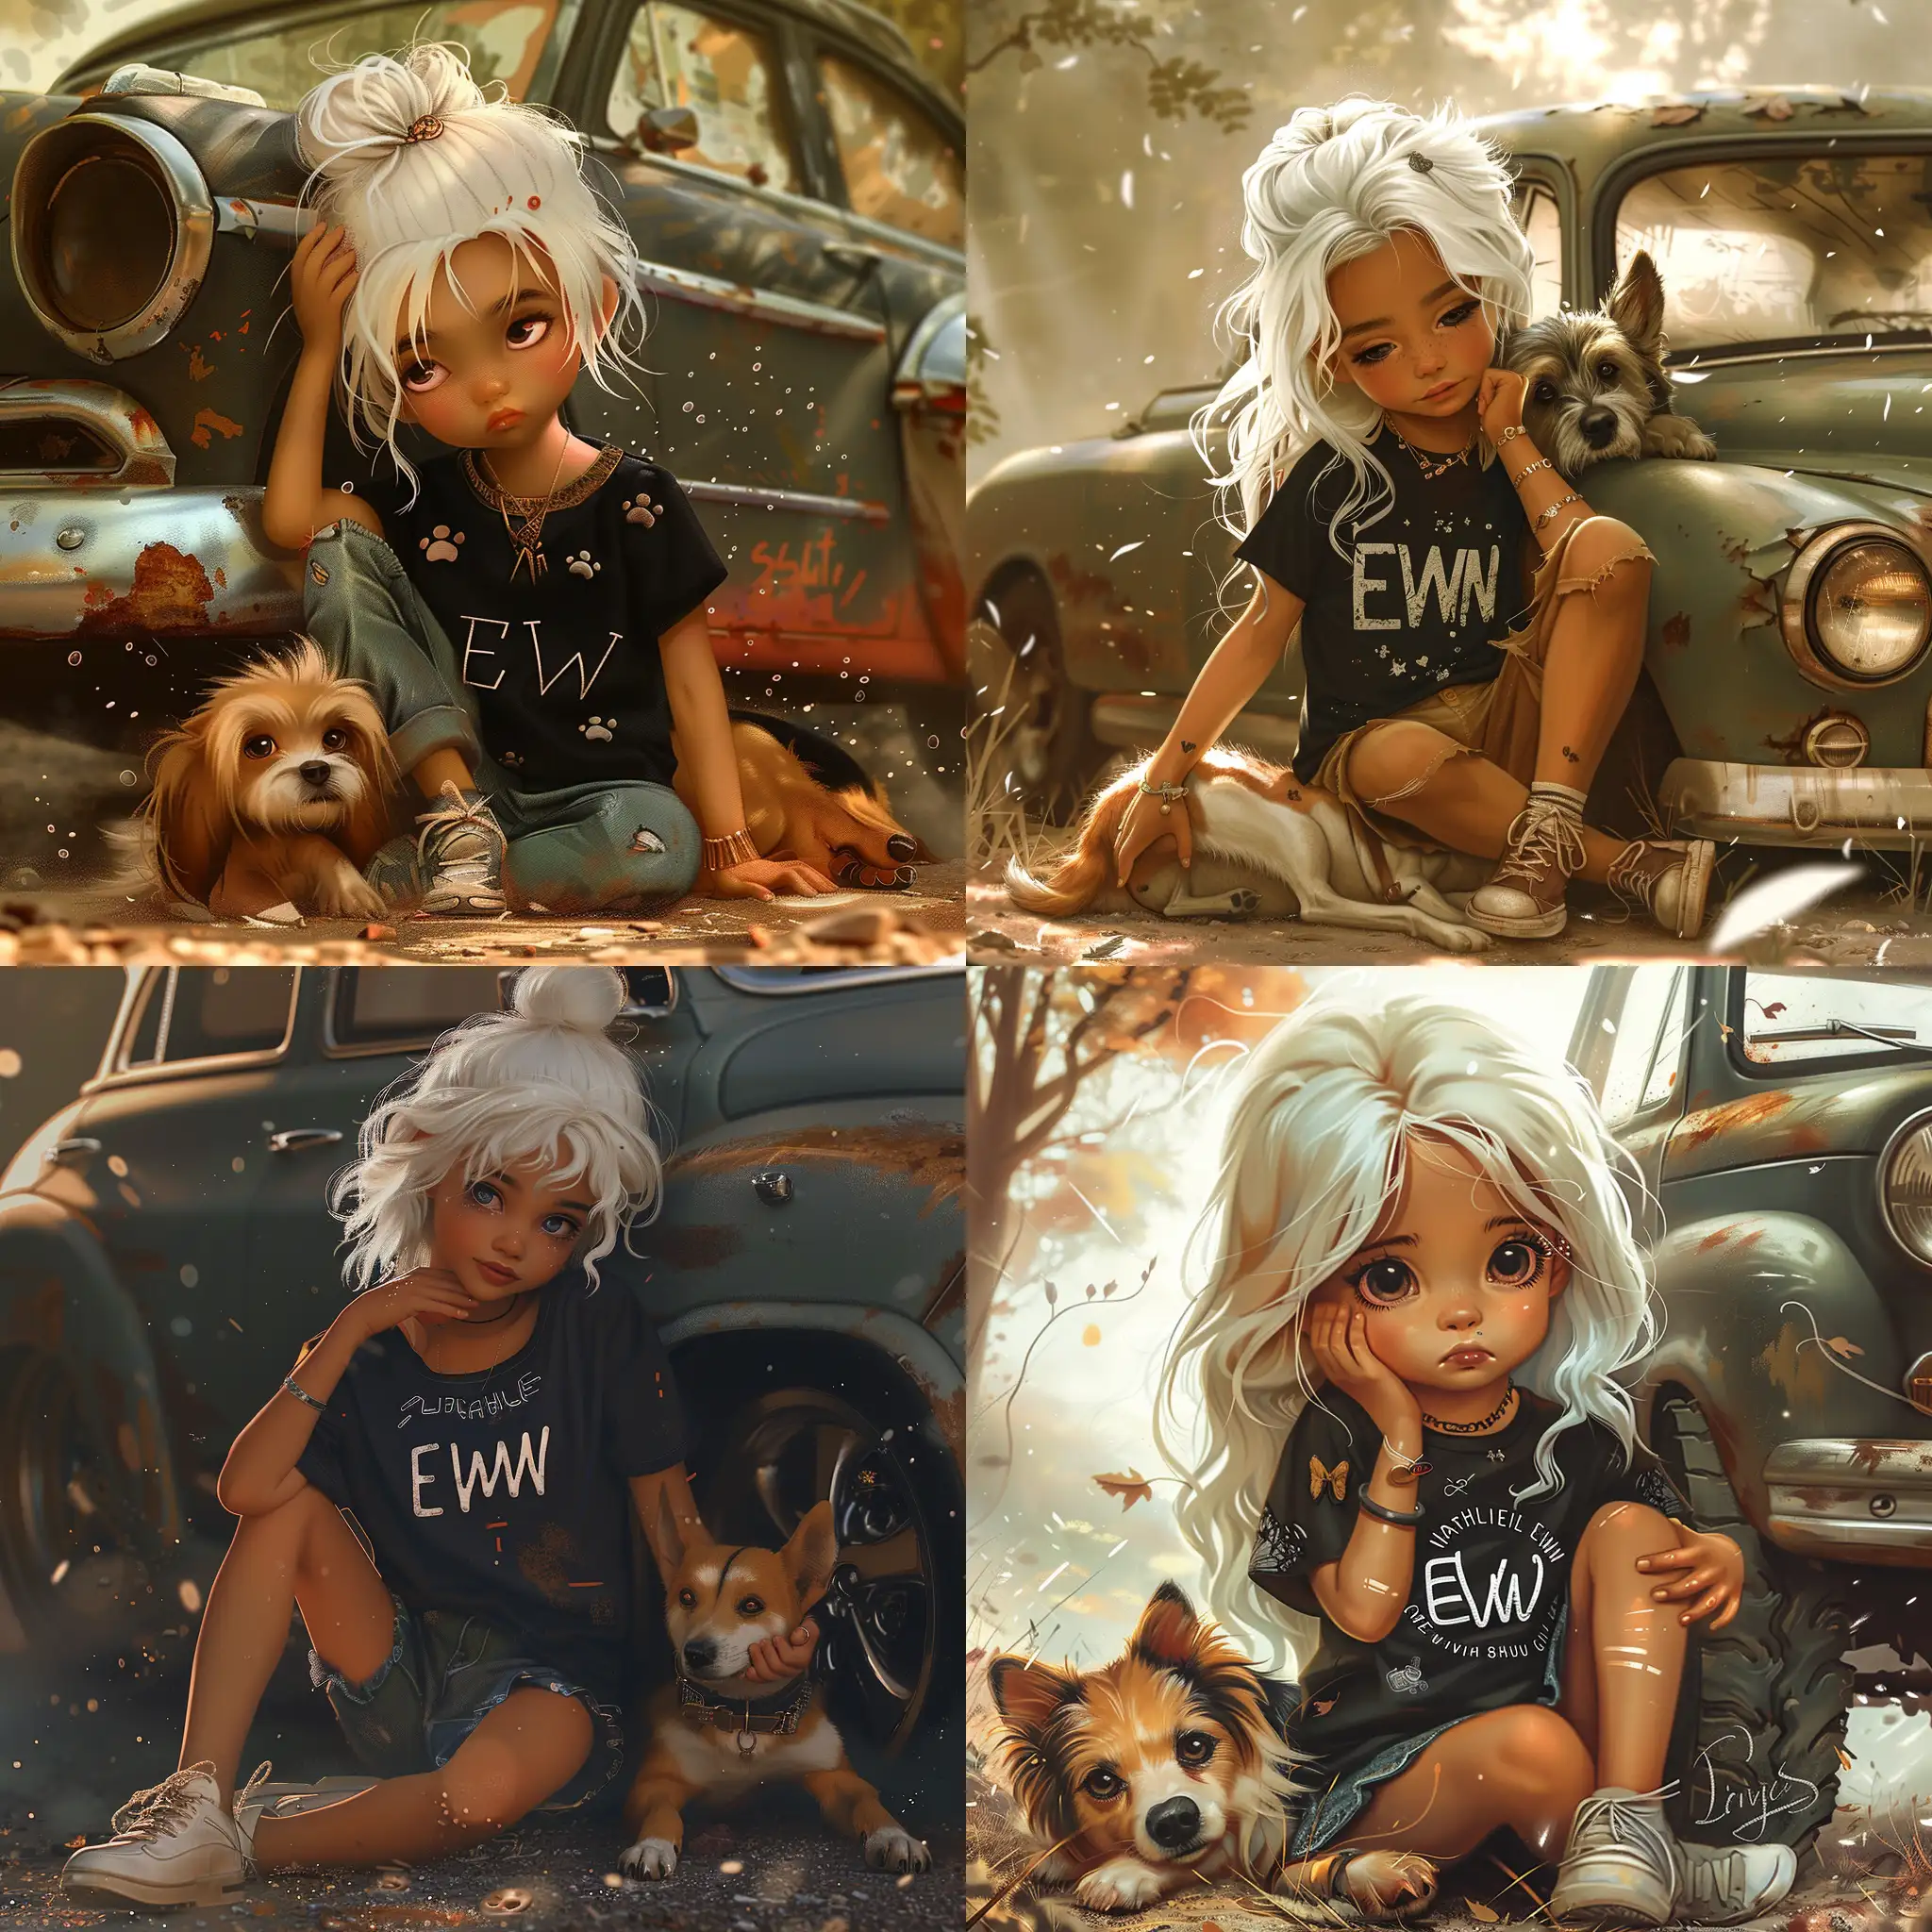 Surreal-Bohemian-Scene-WhiteHaired-Girl-Cuddling-Dog-by-Old-Car